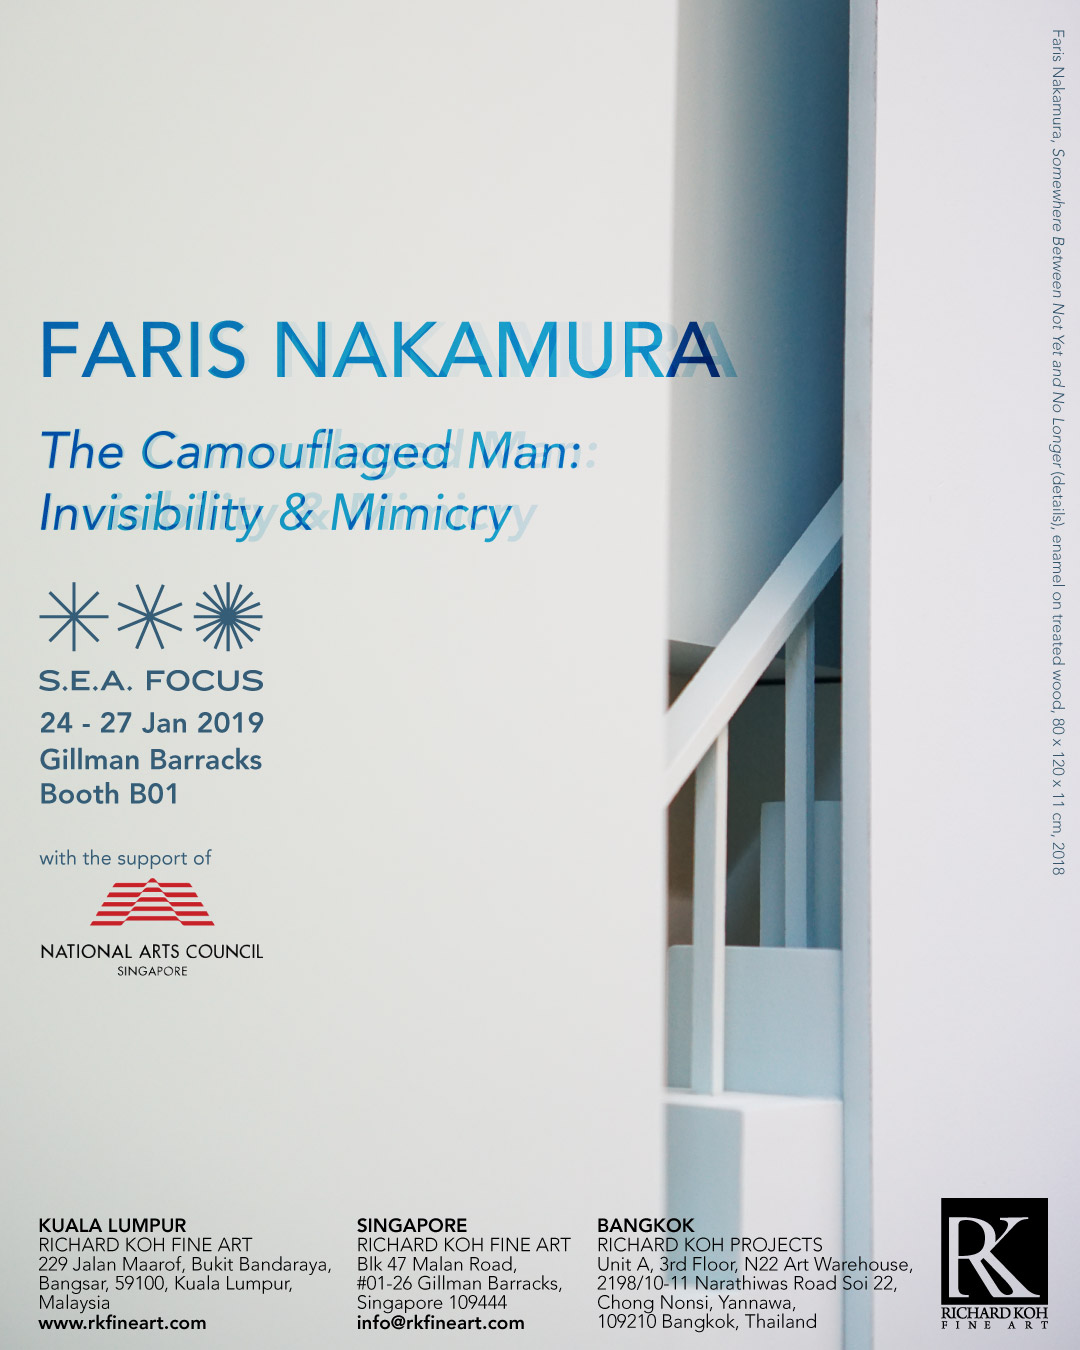   Faris Nakamura – The Camouflaged Man: Invisibility & Mimicry